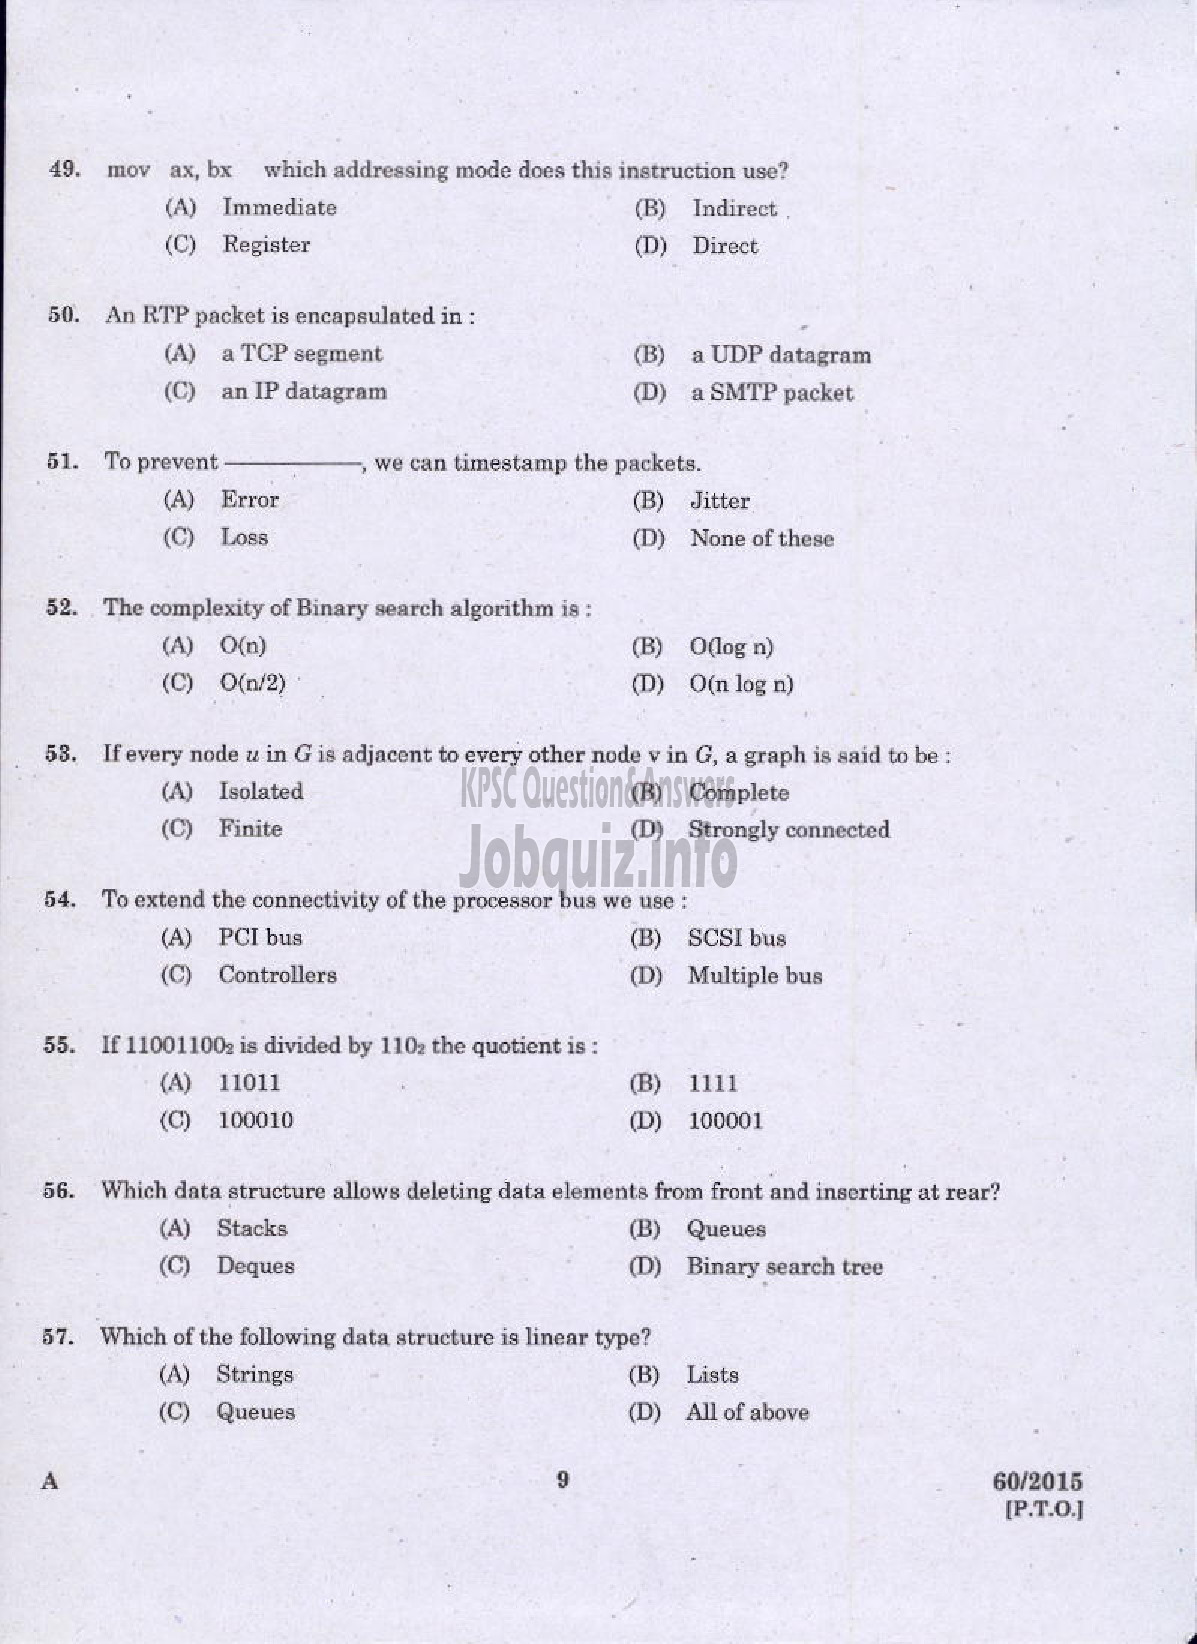 Kerala PSC Question Paper - COMPUTER PROGRAMMER TECHNICAL EDUCATION ENGINEERING COLLEGES-7